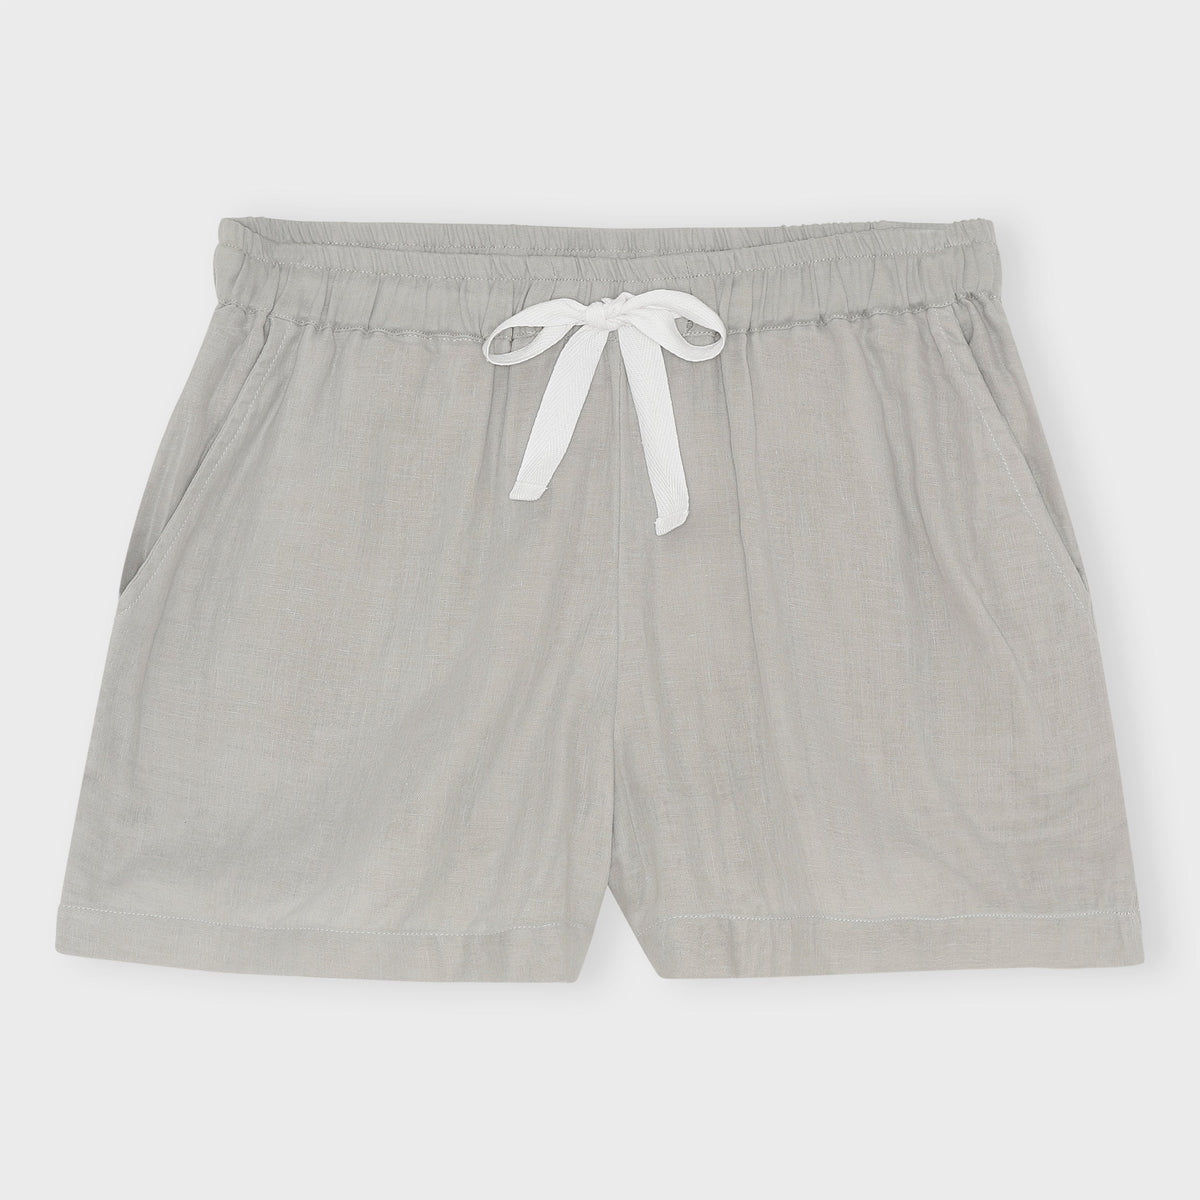 CARE BY ME 100% Organic Cotton Womens Vivienne Shorts